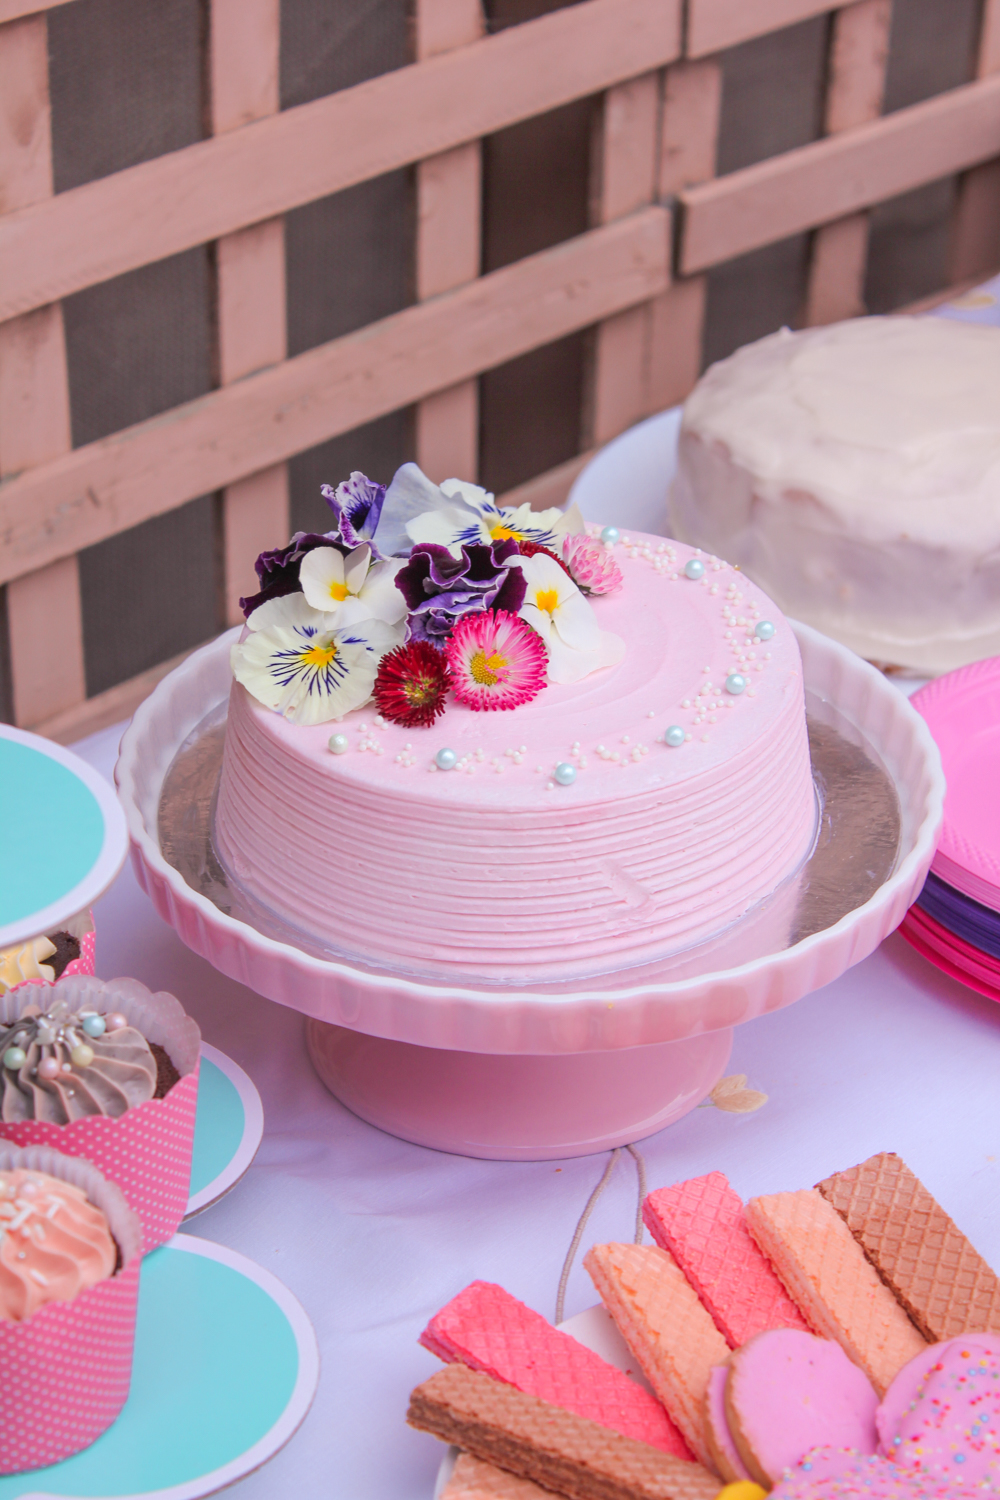 Pink birthday cake decorated with fresh spring flowers